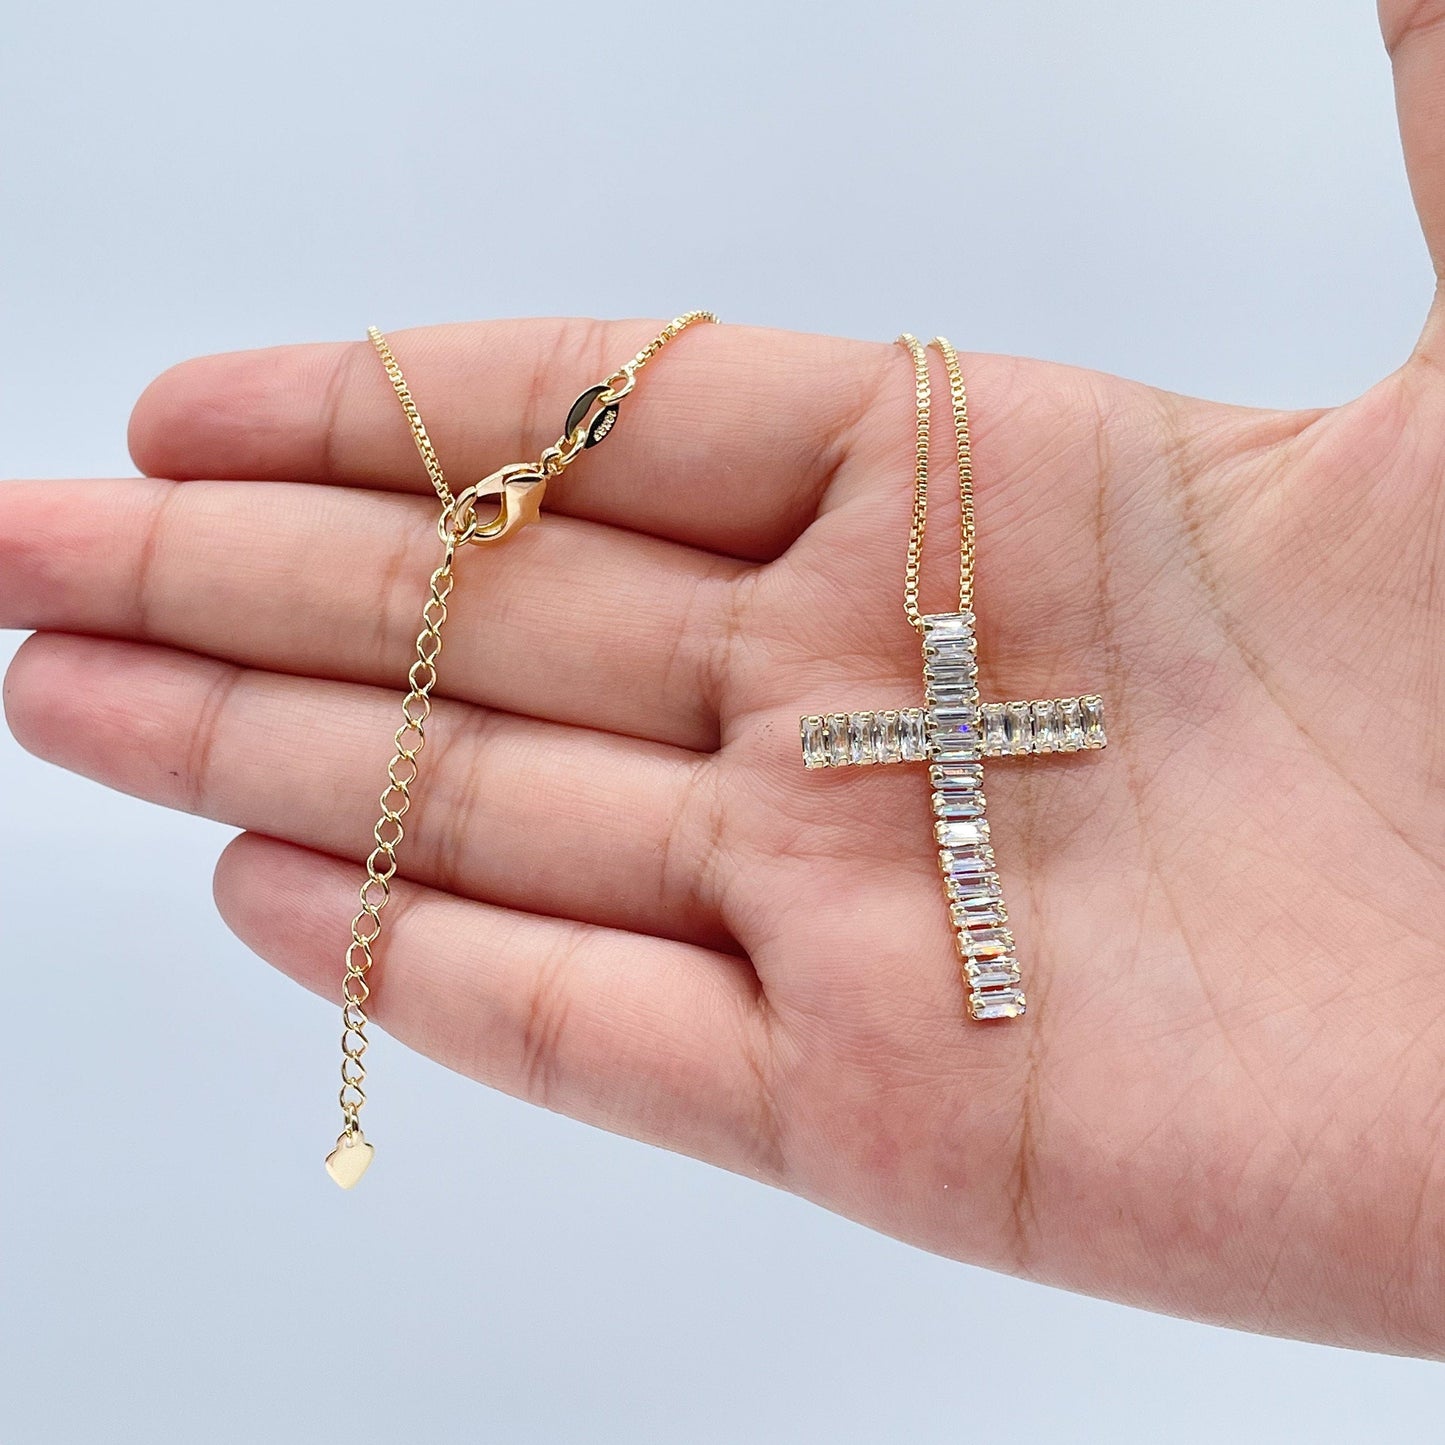 18k Gold Layered Baguette Zirconia Flexible Cross Charm with Box Chain Necklace